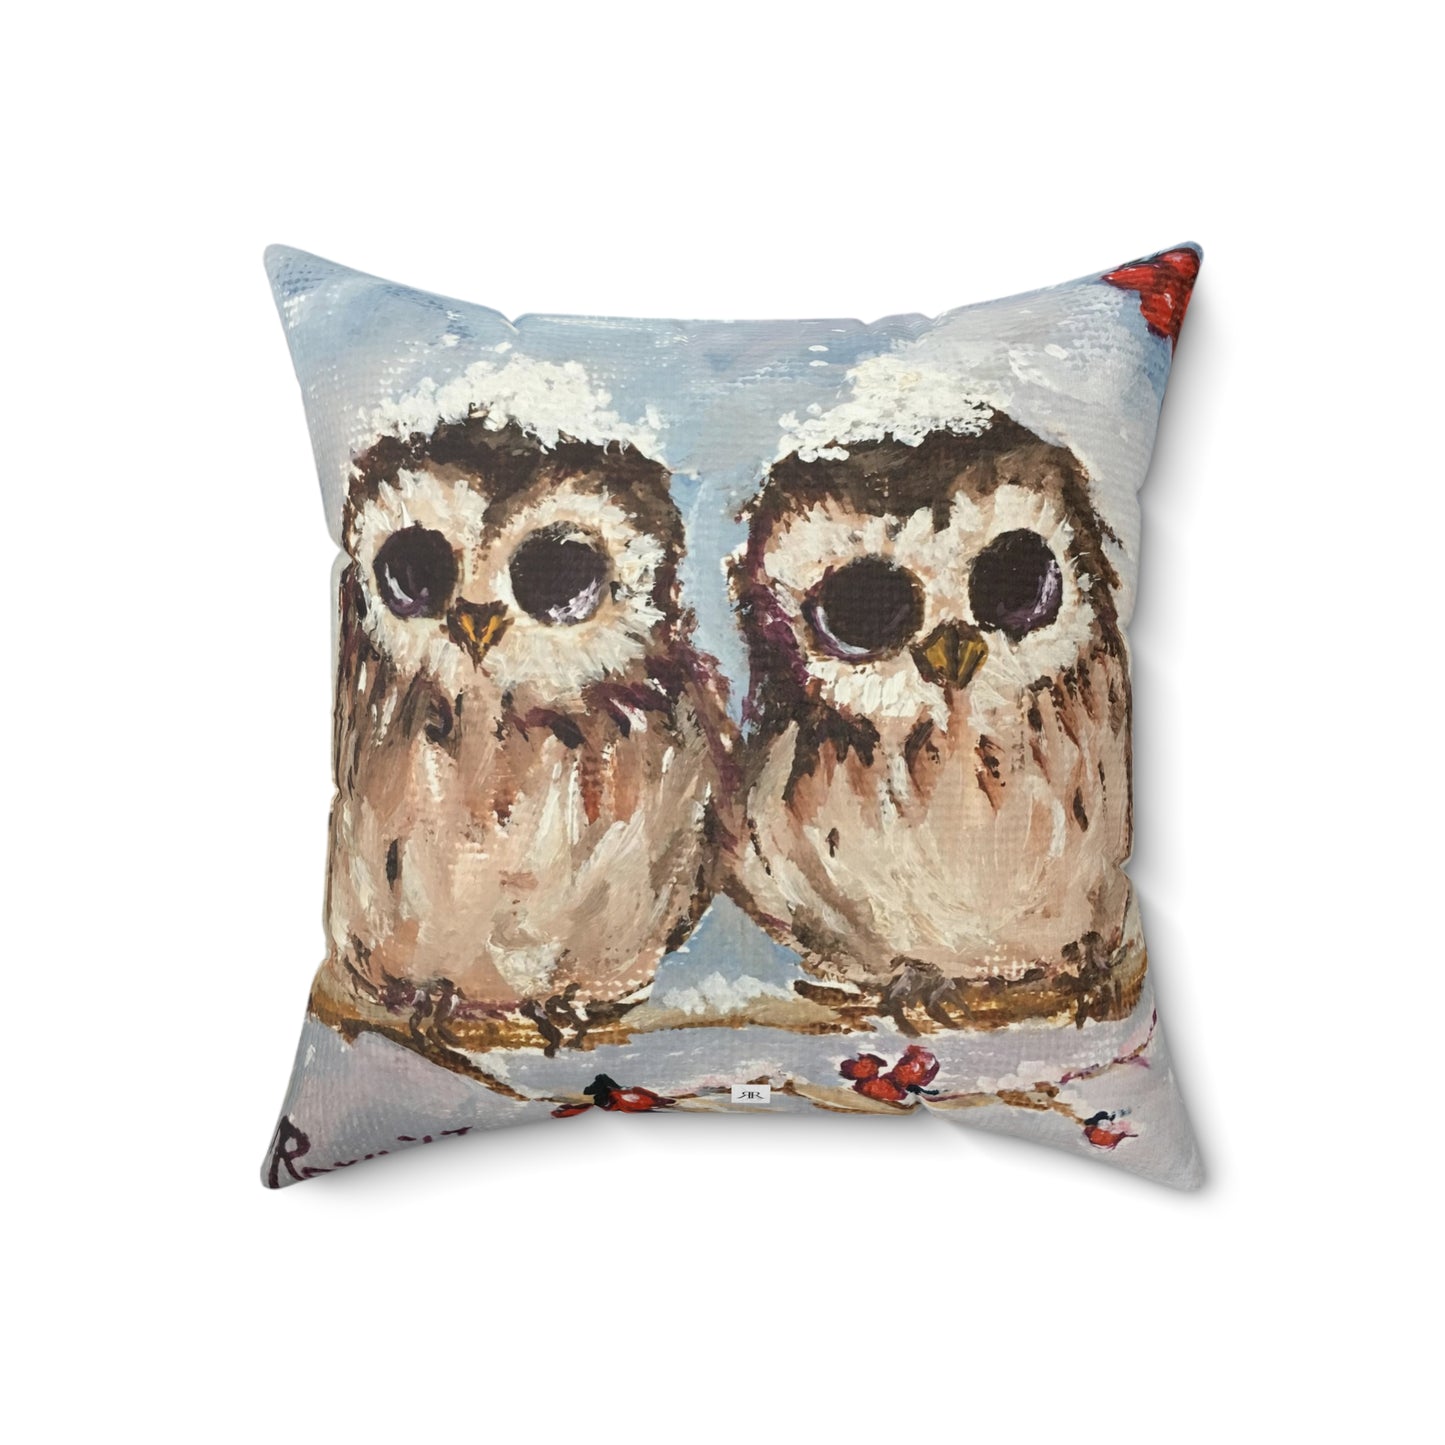 Adorable Owl Chicks with Snow on their Heads Indoor Spun Polyester Square Pillow